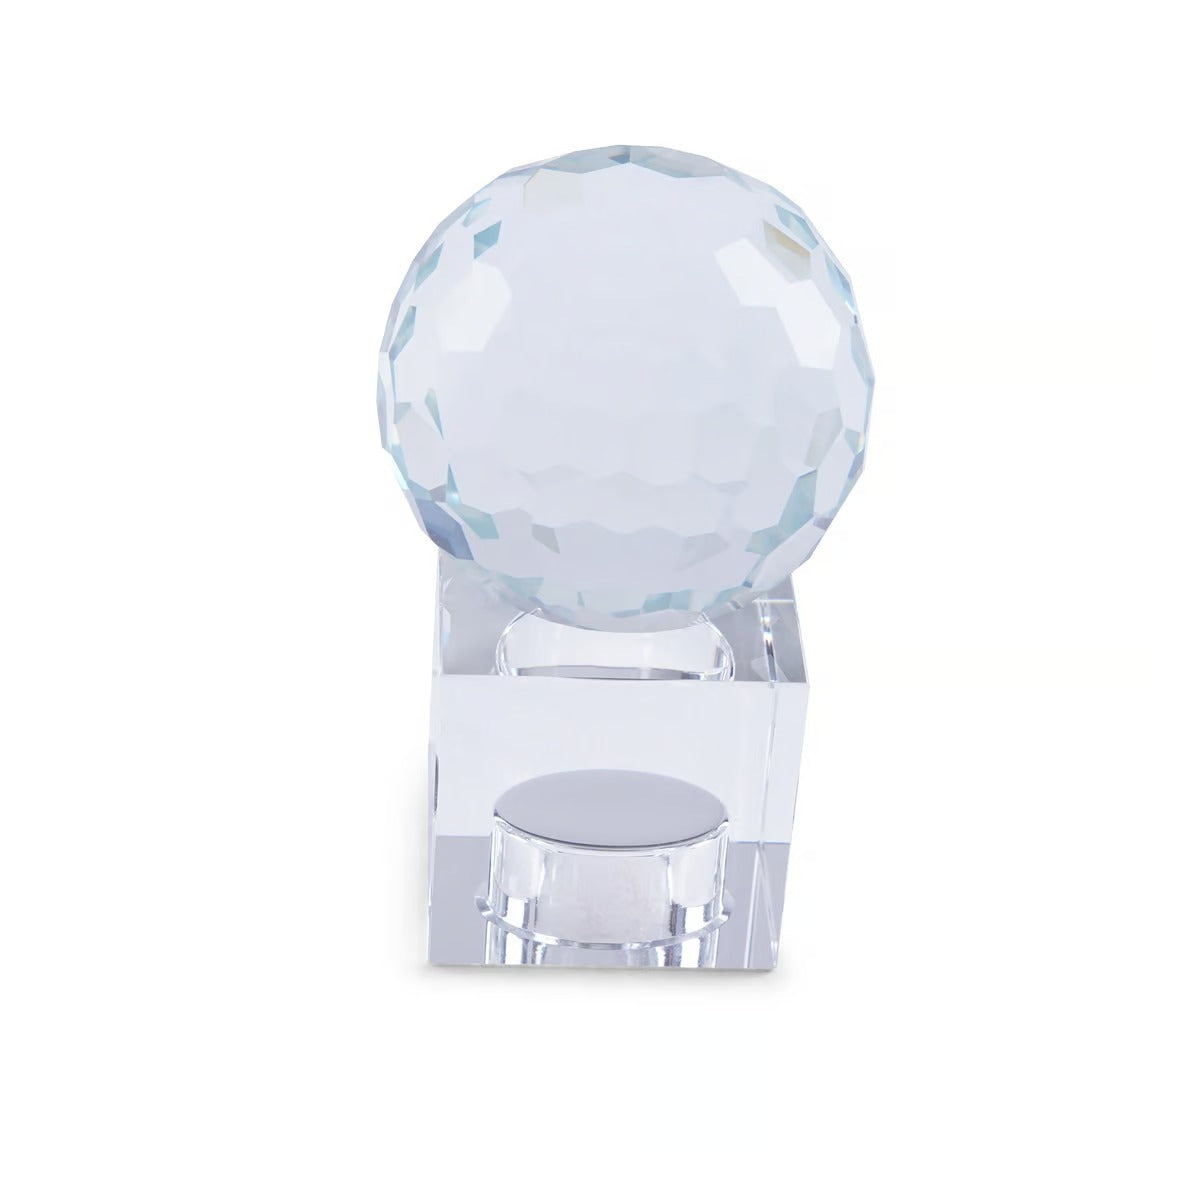 Betsy Candle Holder 8x8x24cm-Clear